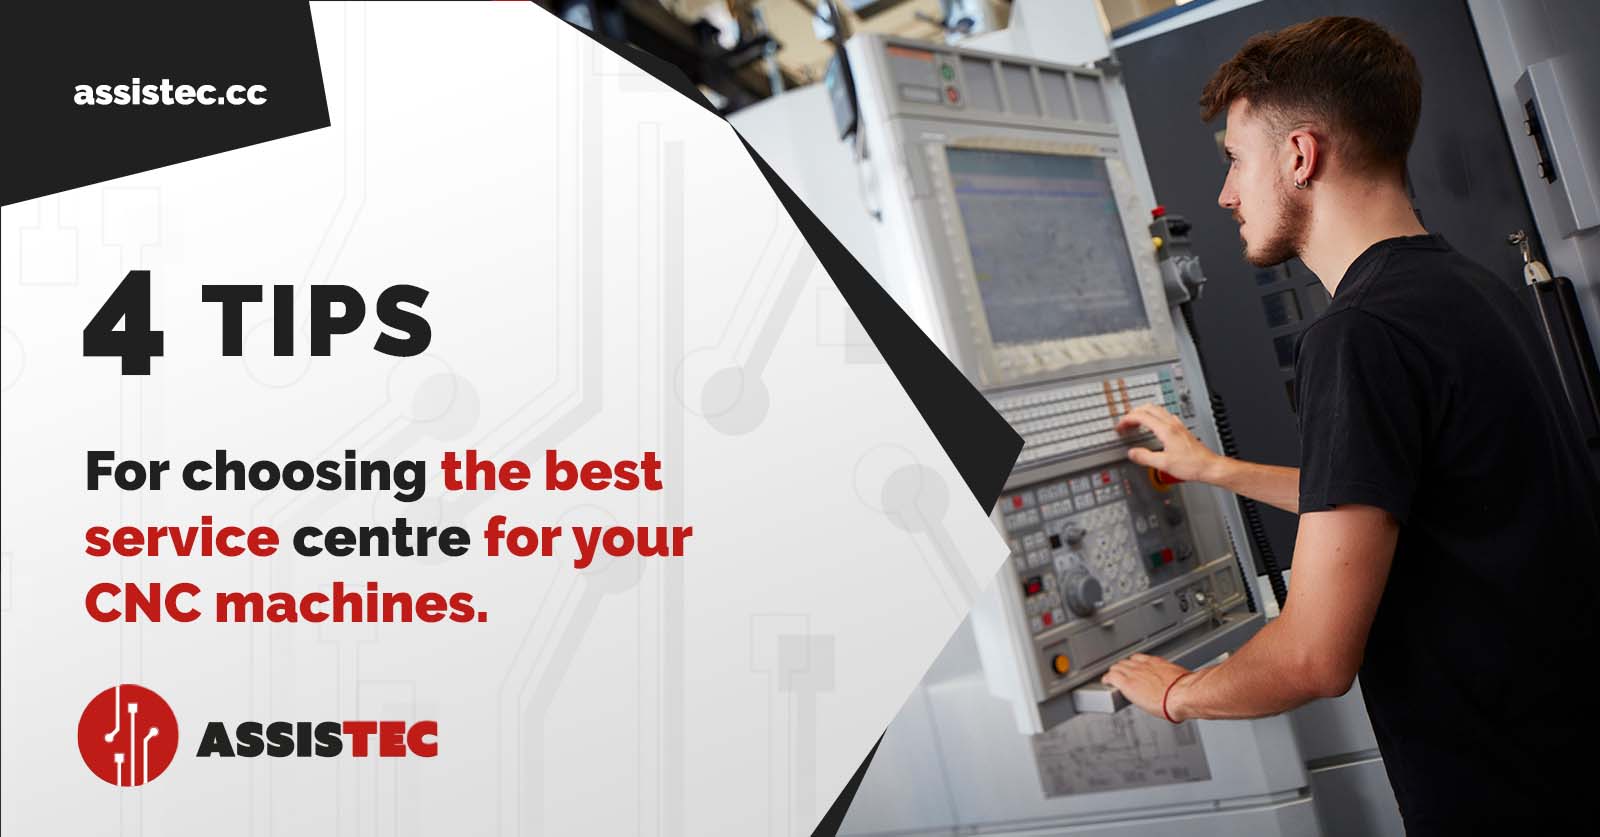 Four tips for choosing the best service centre for your CNC machines